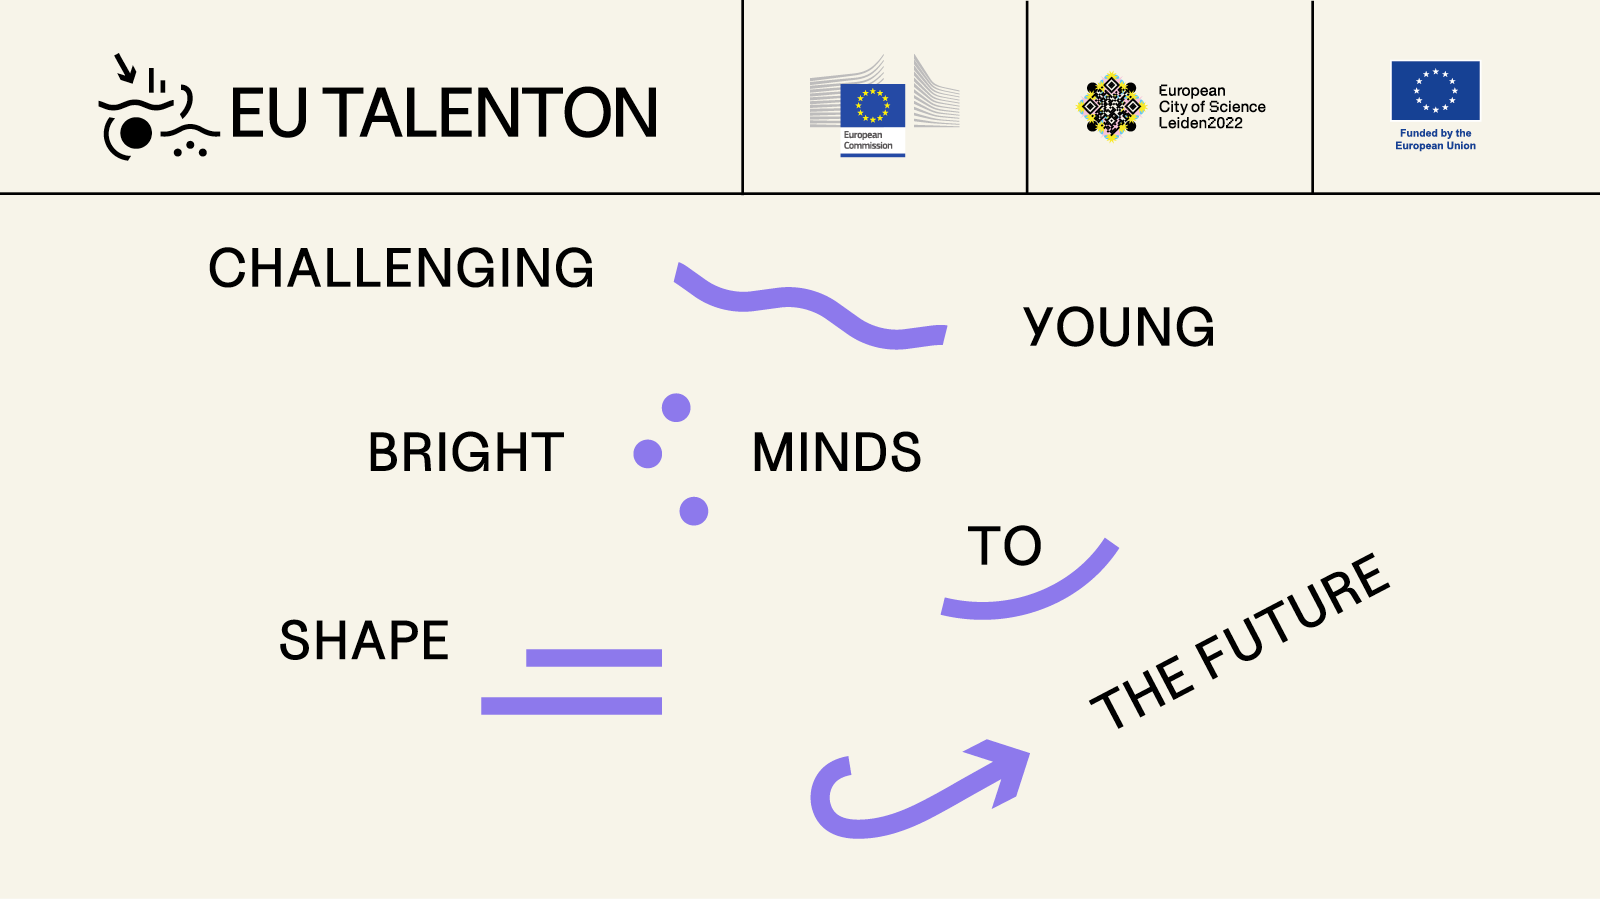 #EUTalentOn - challenging young bright minds to shape Europe's future